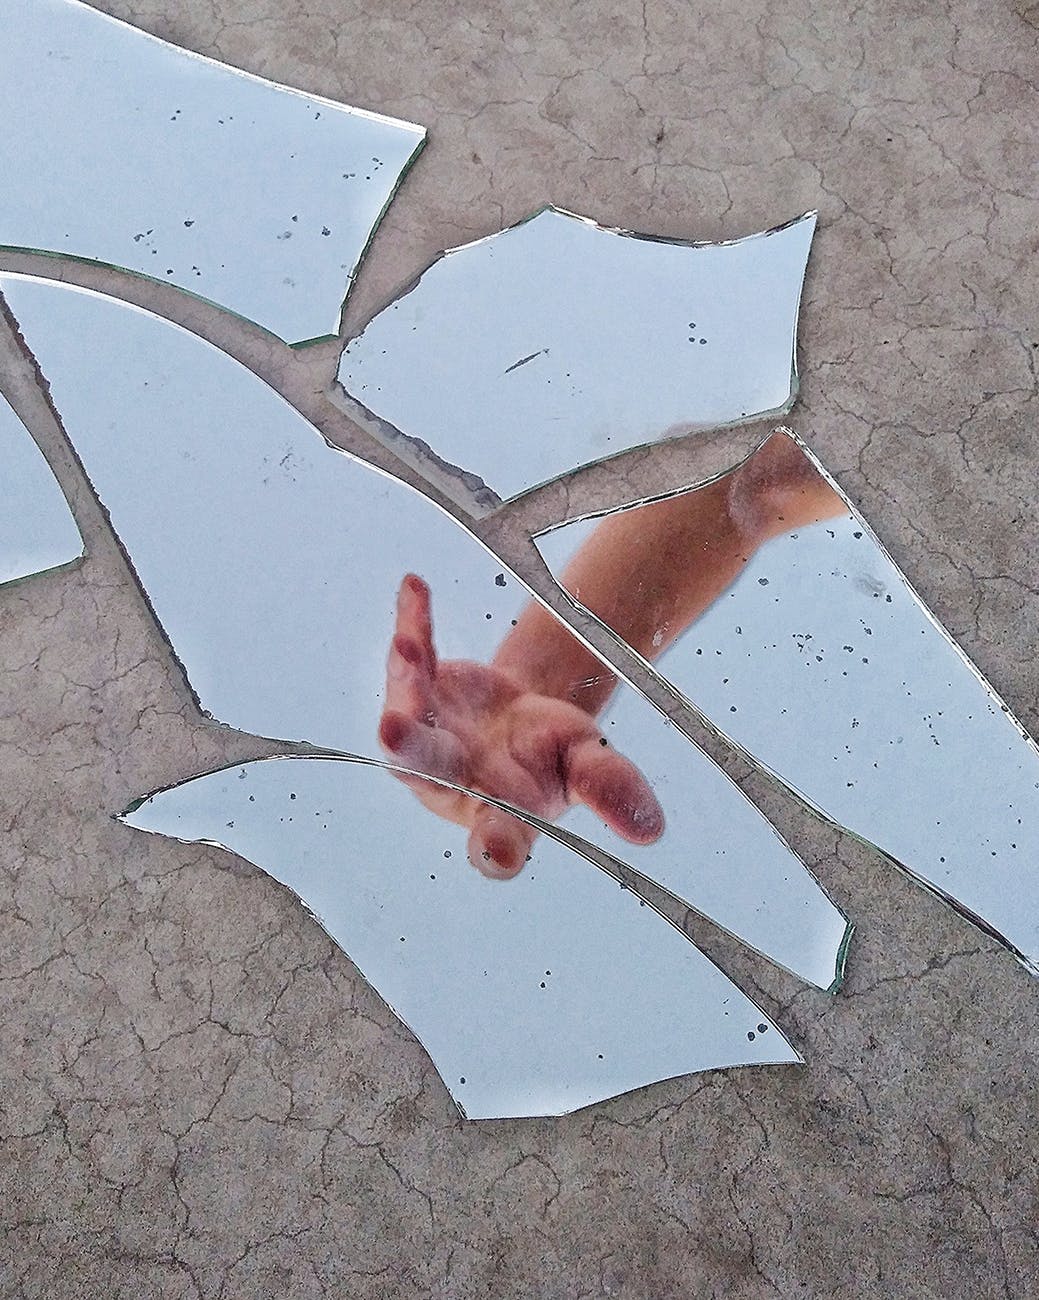 mirror fragments on gray surface with the reflection of a person s arm